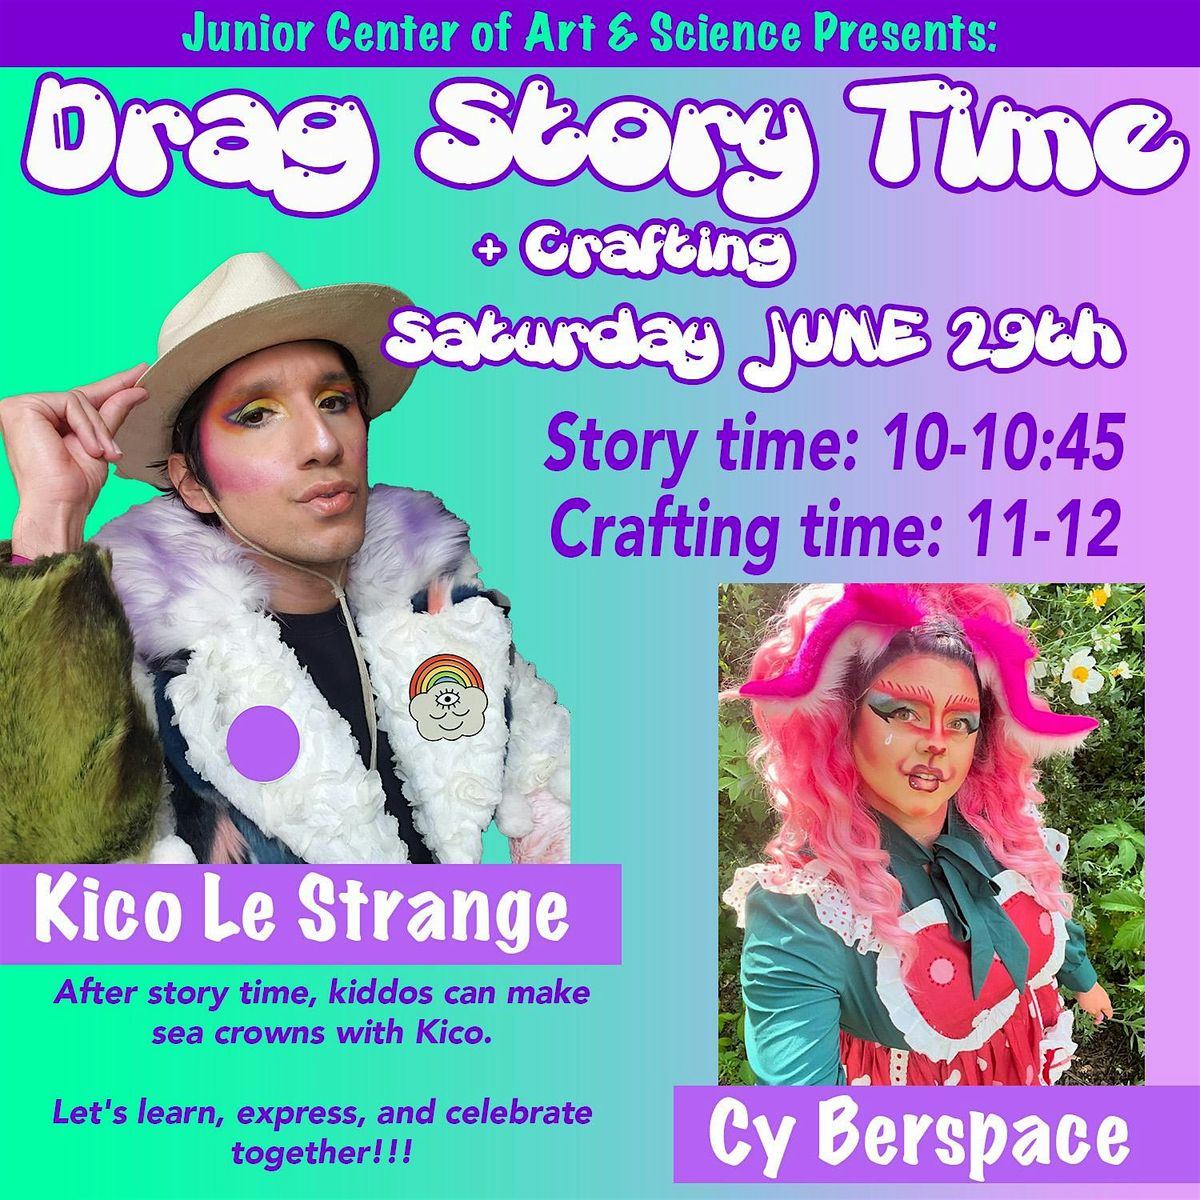 DRAG STORY TIME + CRAFTING